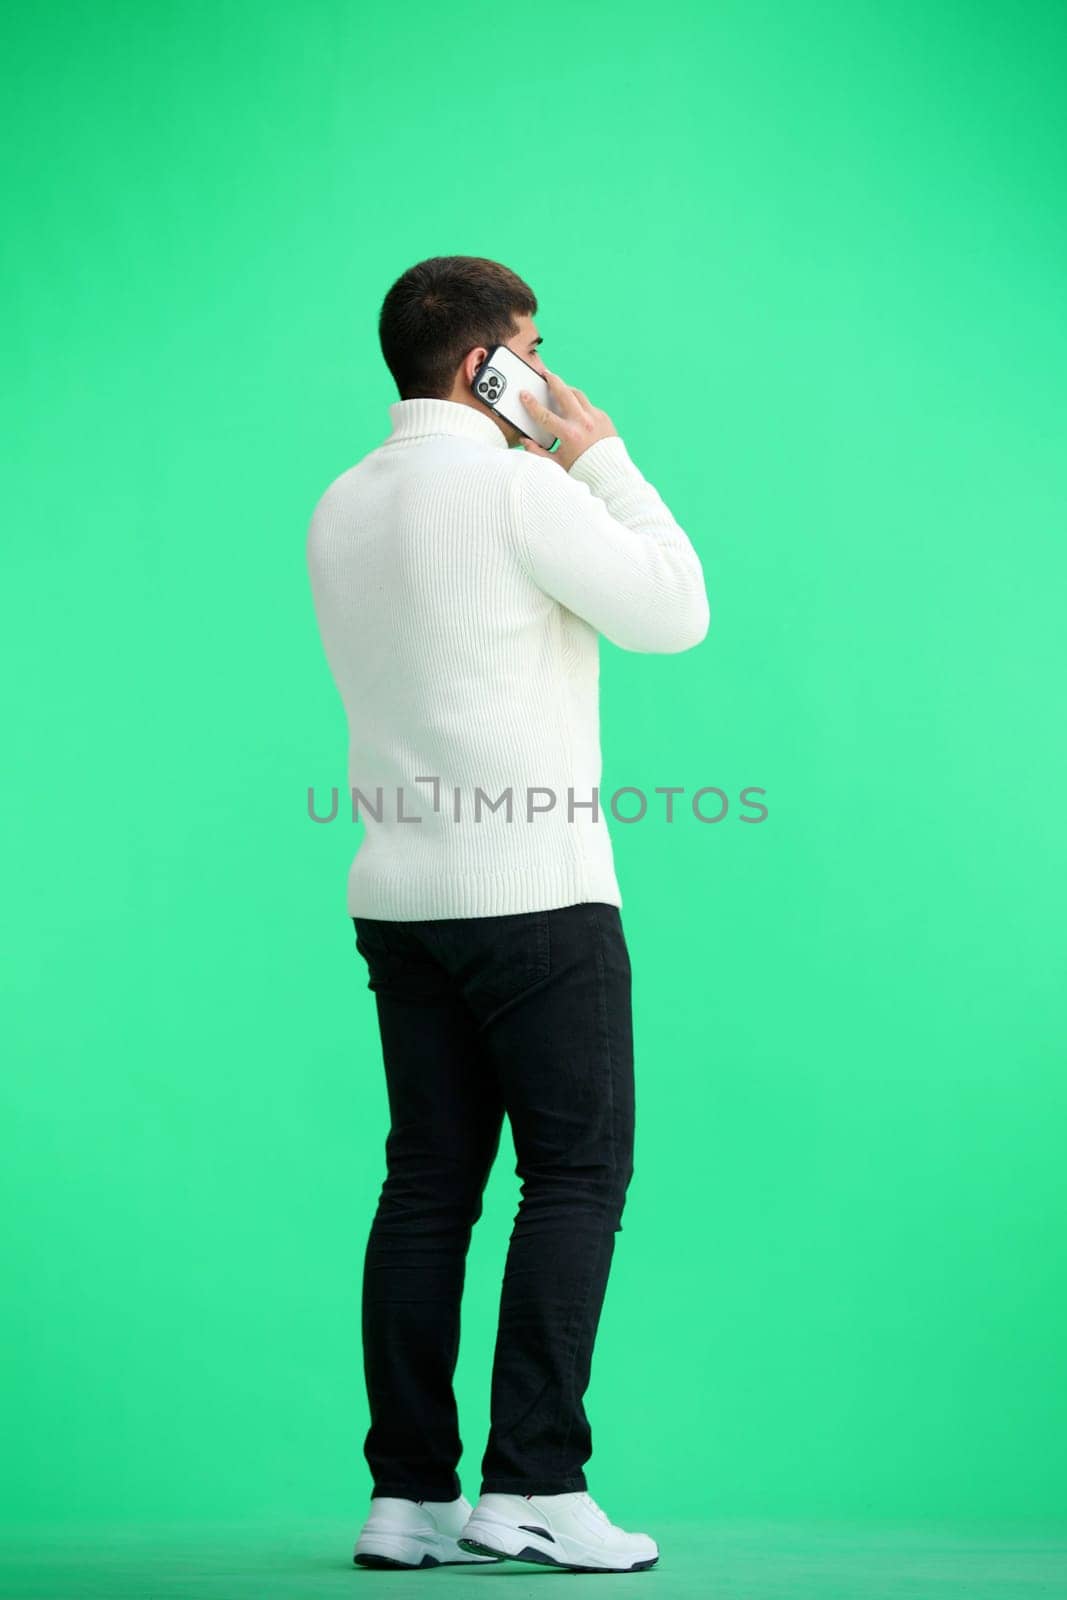 A man, full-length, on a green background, talking on the phone.